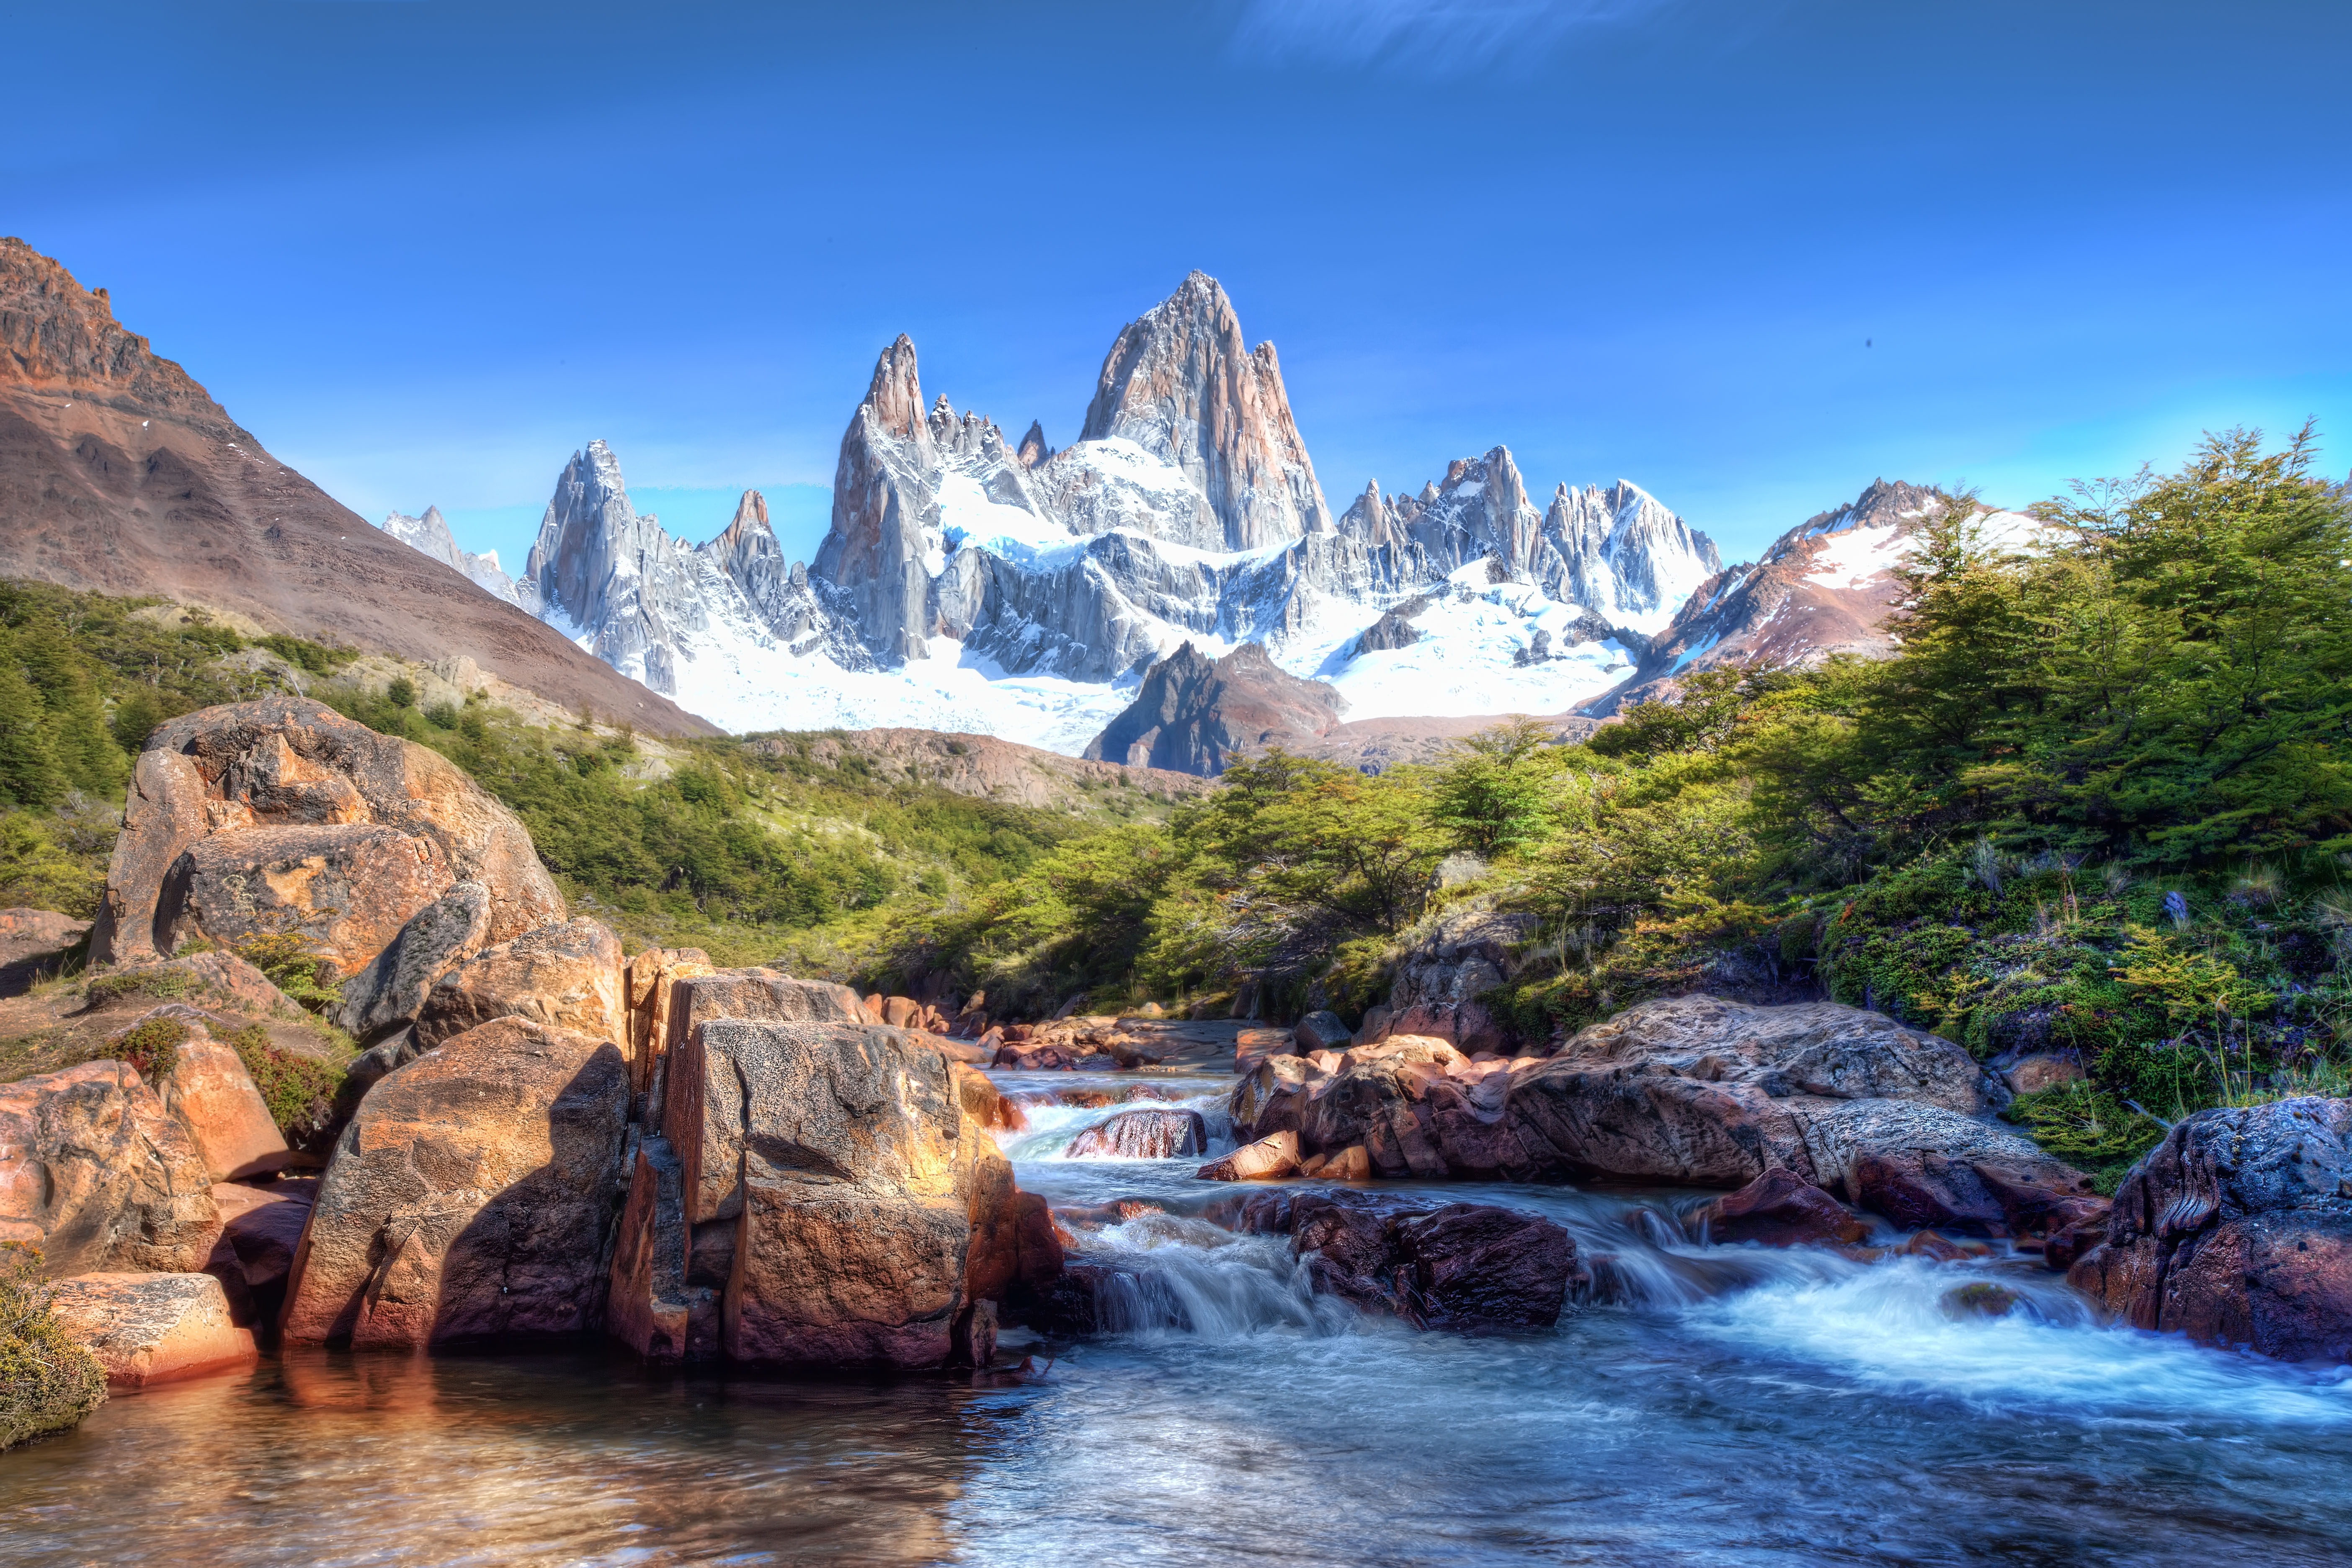 HD wallpaper, Blue Sky, Fitz Roy, Landscape, Glacier Mountains, River Stream, Patagonia, Snow Covered, Picturesque, Mountain Peaks, Sunny Day, Rocks, 5K, Argentina, Scenery